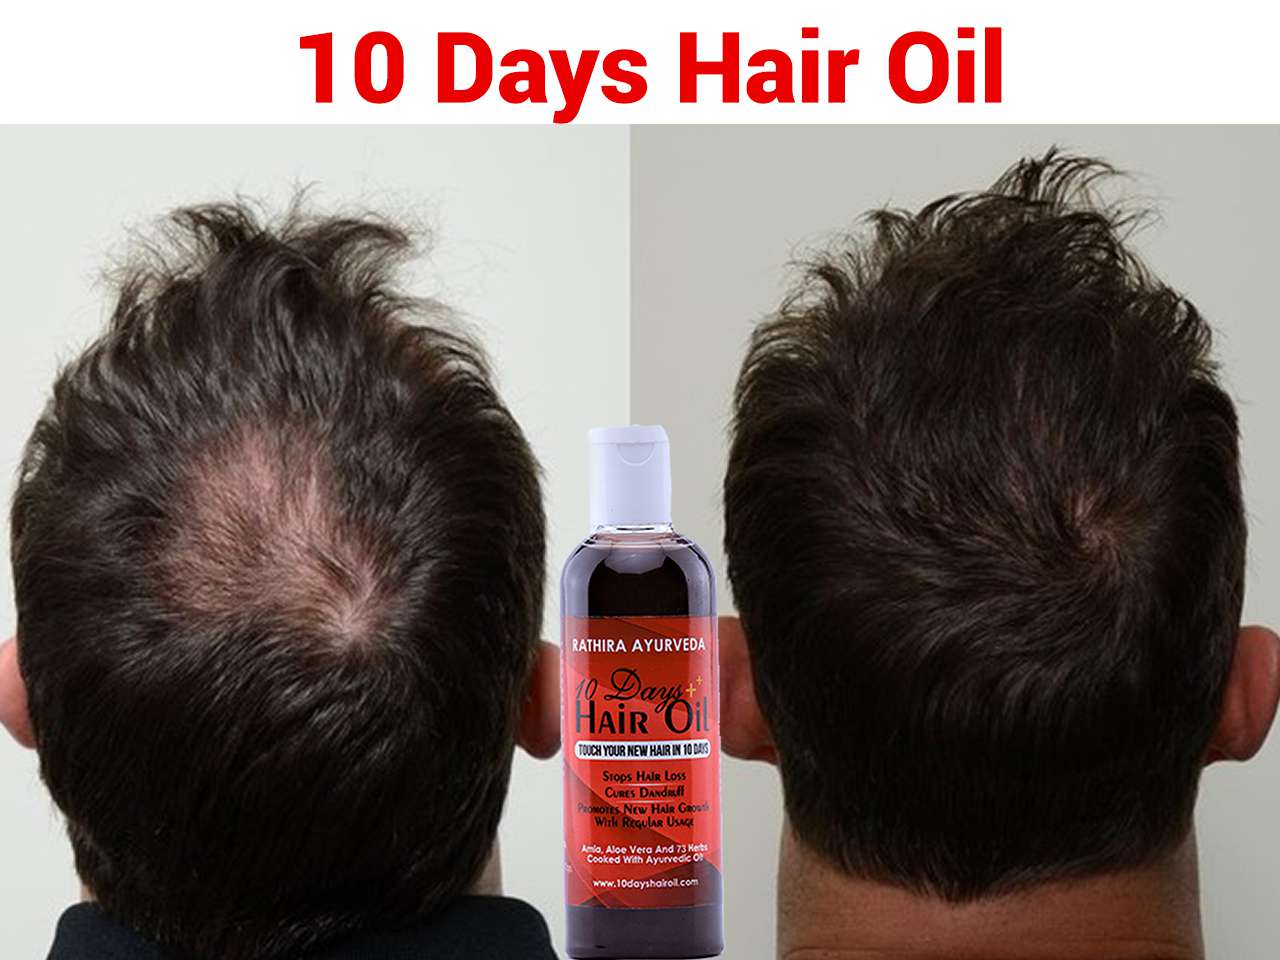 Taboola Ad Example 39577 - Going Bald? This ’10 Days’ Ayurvedic Hair Oil From Kerala Can Help You !